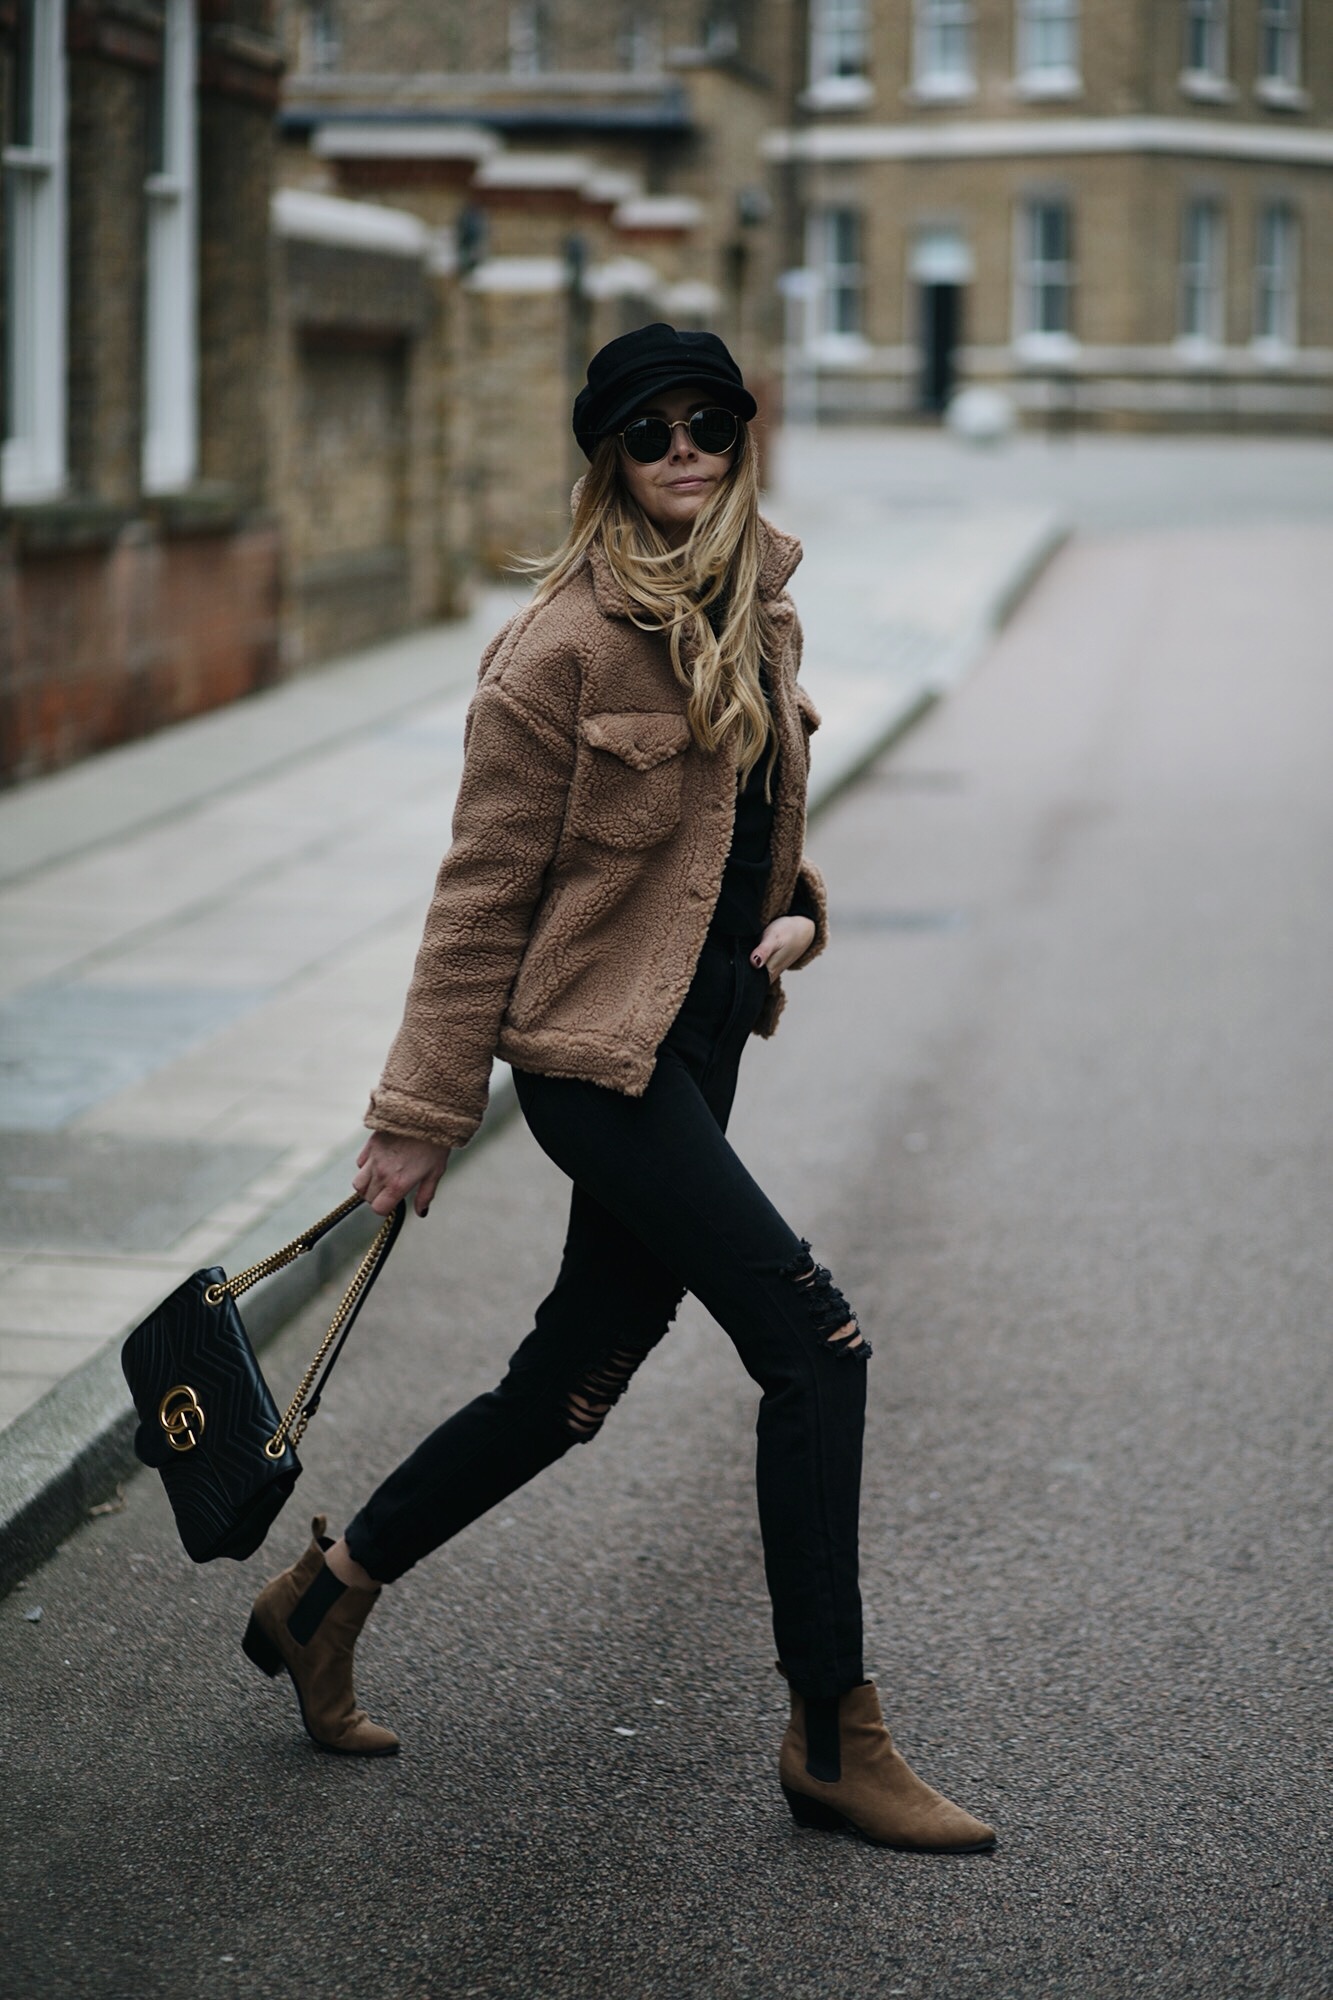 Emma Hill wear camel teddy jacket, ripped black jeans, Gucci Marmont bag, Rayban round gold sunglasses, tan suede Chelsea ankle boots, black baker boy cap hat. Casual Winter outfit